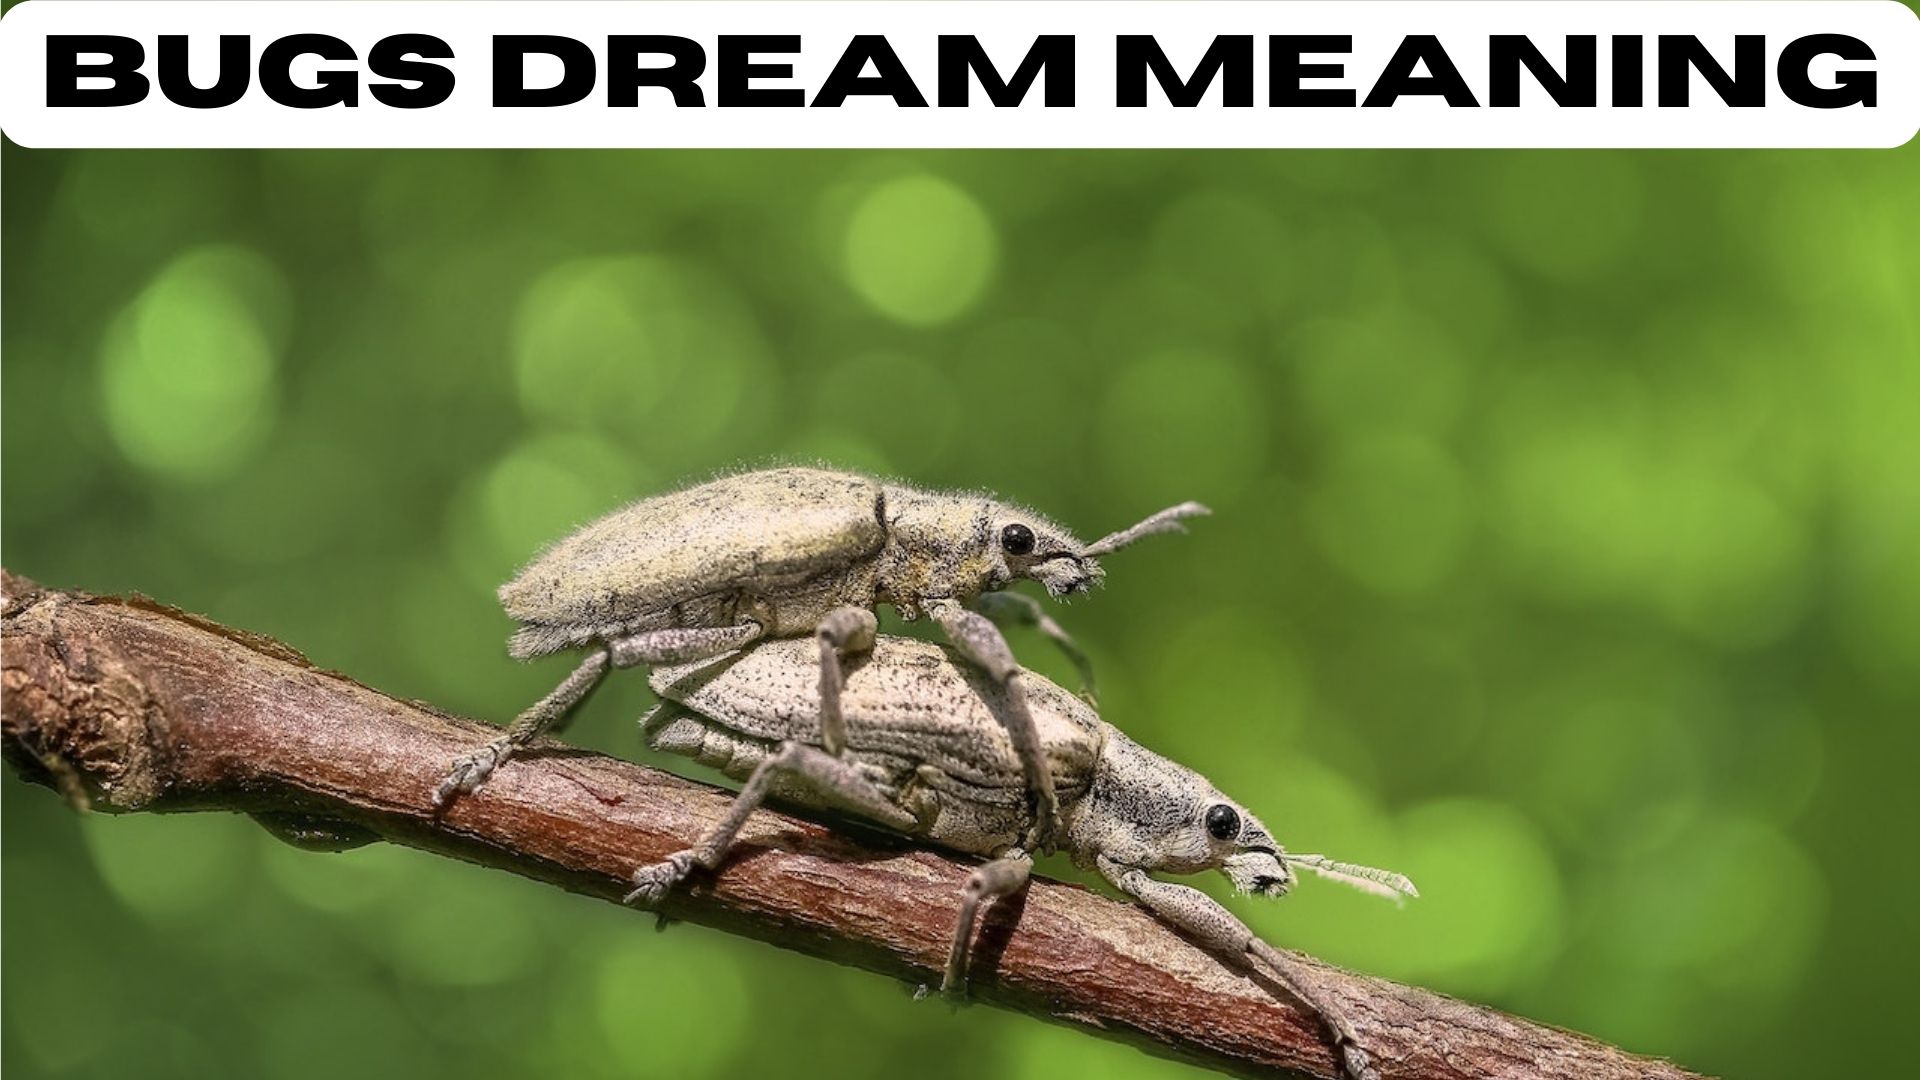 Bugs Dream Meaning - Represent The Negative Emotions